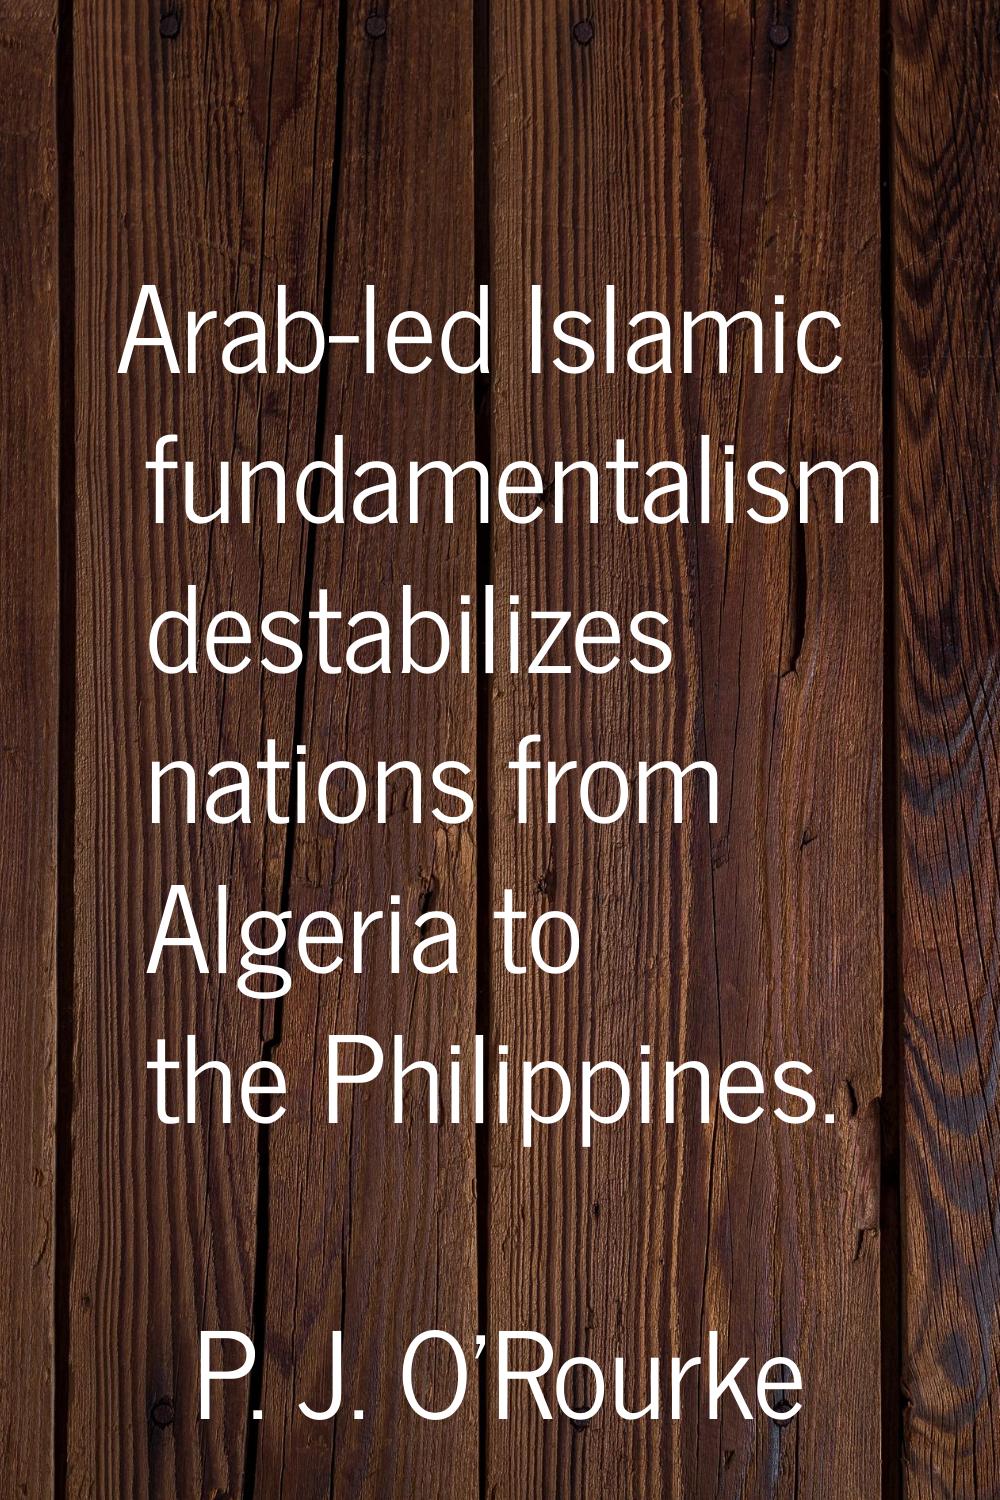 Arab-led Islamic fundamentalism destabilizes nations from Algeria to the Philippines.